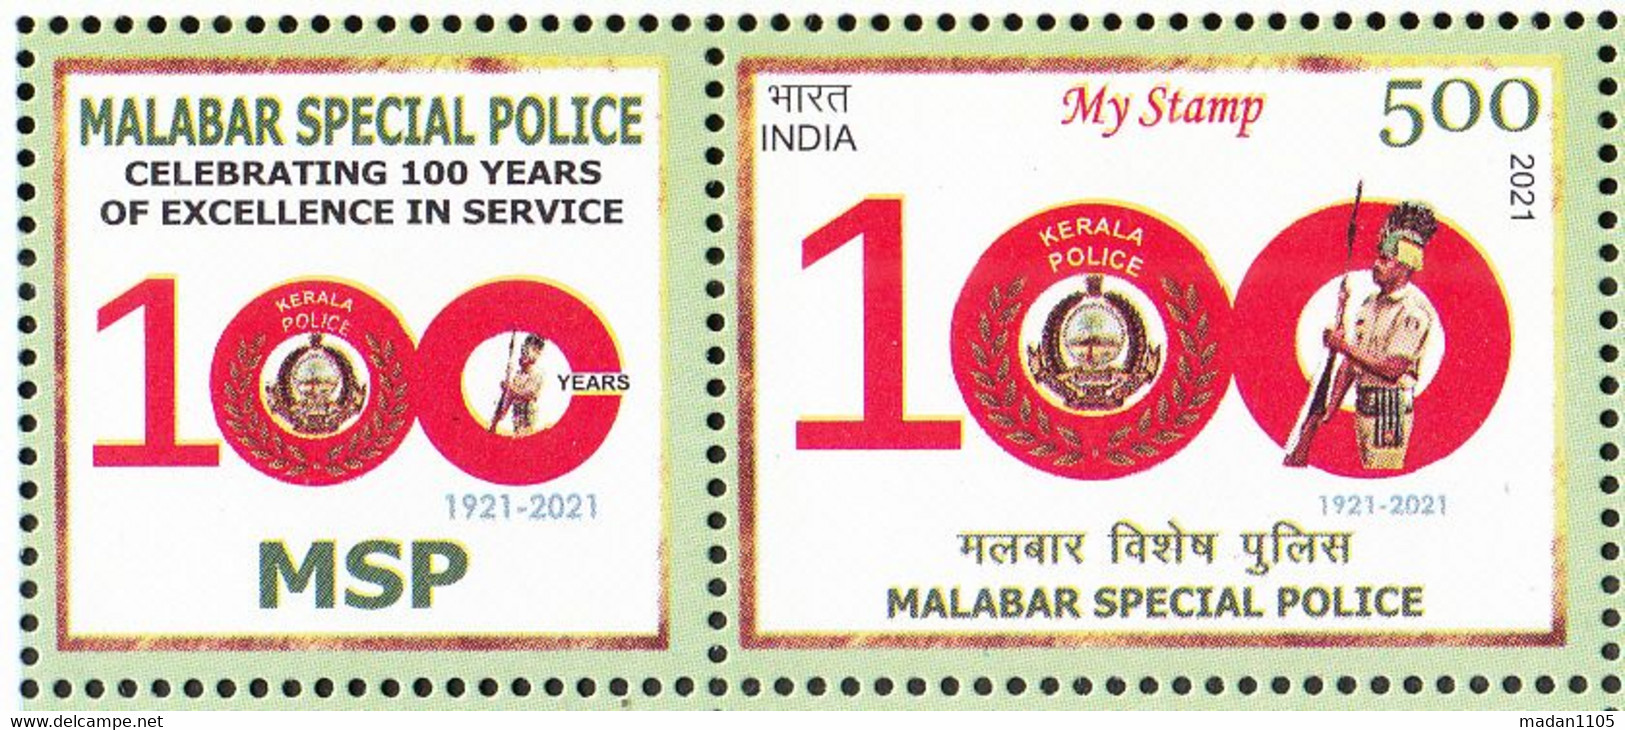 INDIA 2021 MY STAMP, MALABAR SPECIAL POLICE Centenary, Kerala,LIMITED ISSUE ,MNH(**) - Unused Stamps